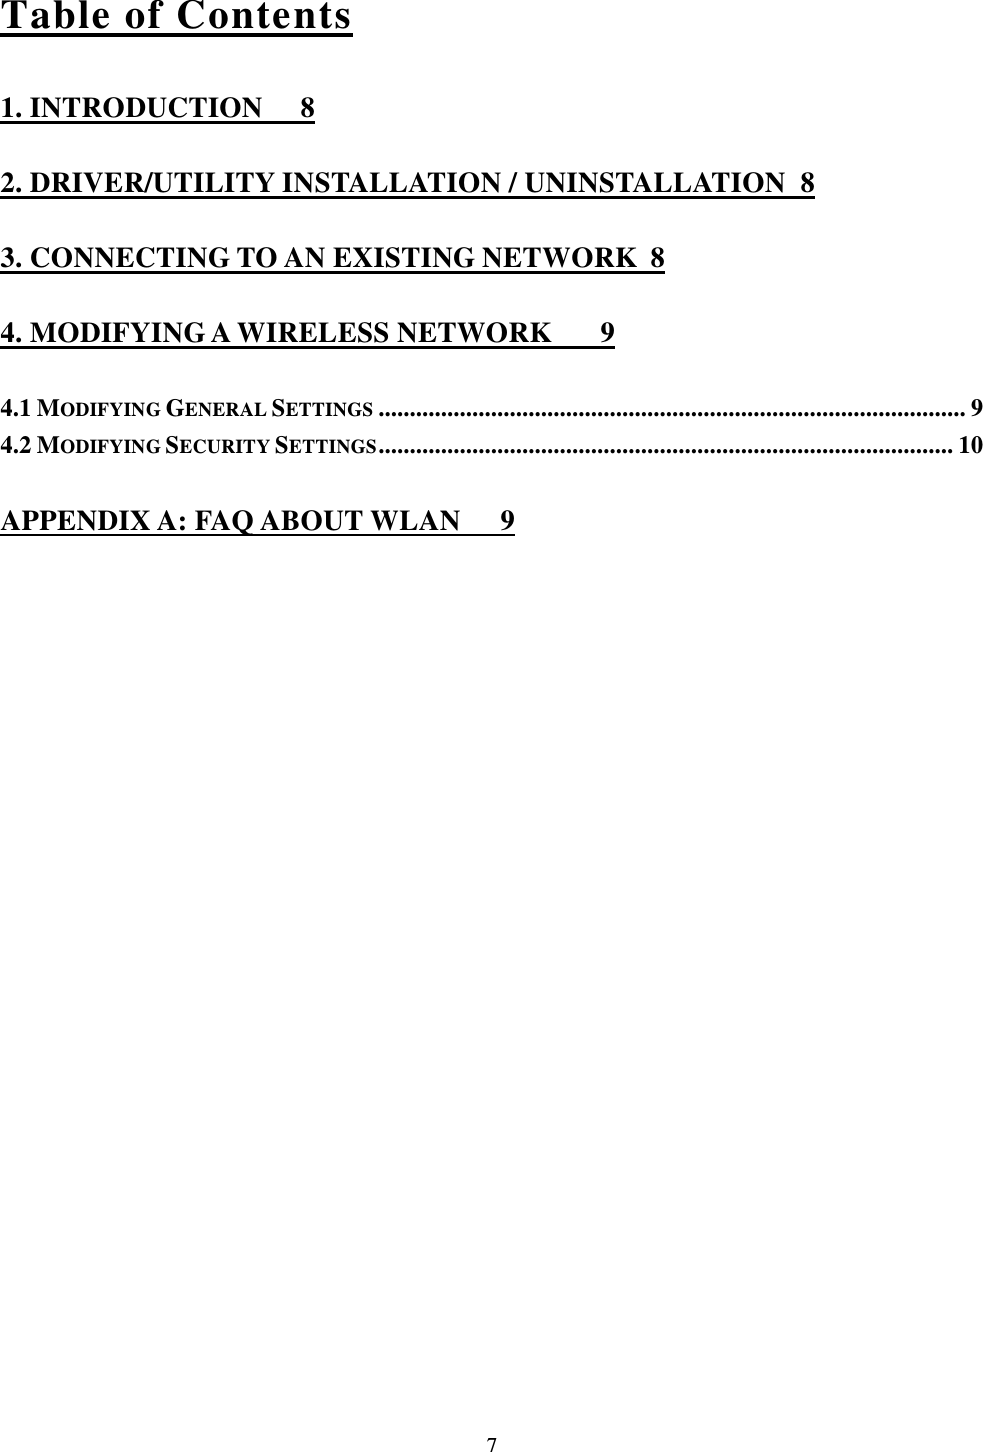  7 Table of Contents 1. INTRODUCTION  8 2. DRIVER/UTILITY INSTALLATION / UNINSTALLATION  8 3. CONNECTING TO AN EXISTING NETWORK  8 4. MODIFYING A WIRELESS NETWORK  9 4.1 MODIFYING GENERAL SETTINGS .............................................................................................. 9 4.2 MODIFYING SECURITY SETTINGS ............................................................................................ 10 APPENDIX A: FAQ ABOUT WLAN  9 